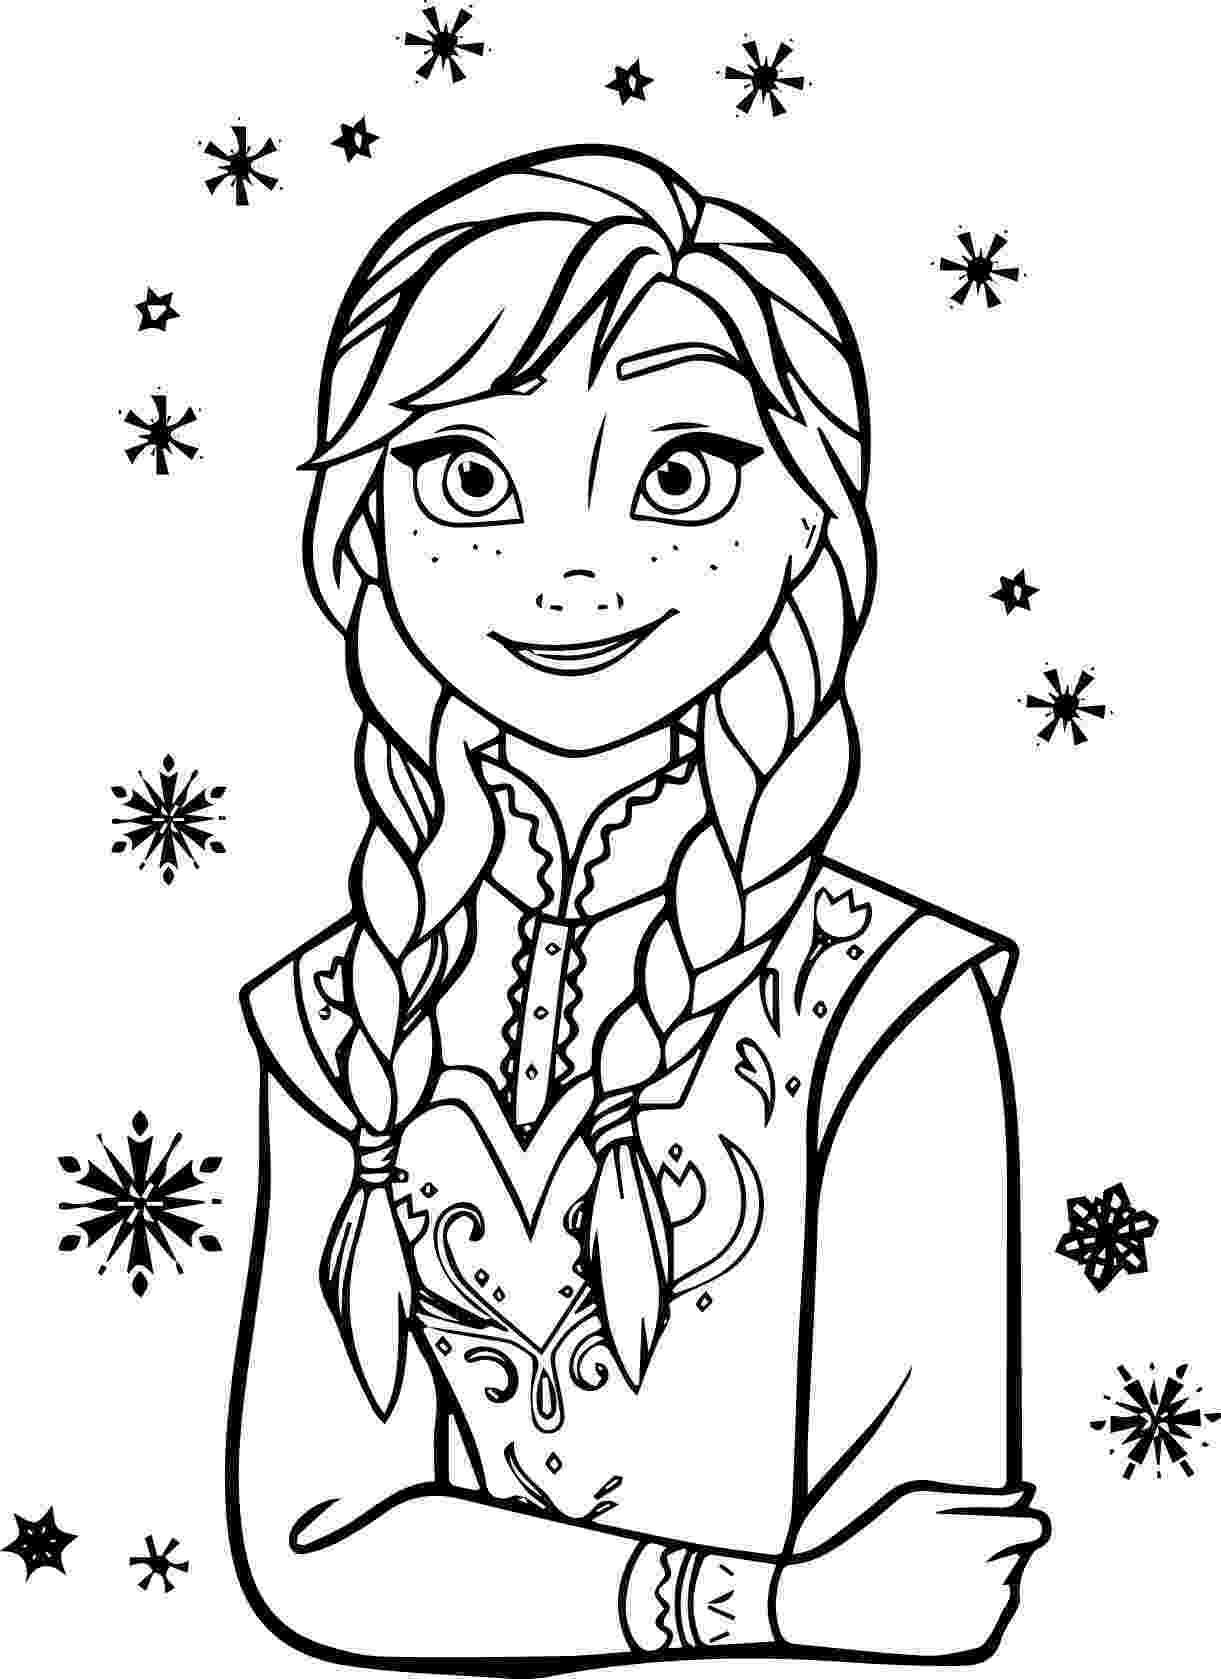 anna from frozen coloring pages princess anna frozen coloring pages 1 coloring pages pages frozen anna from coloring 